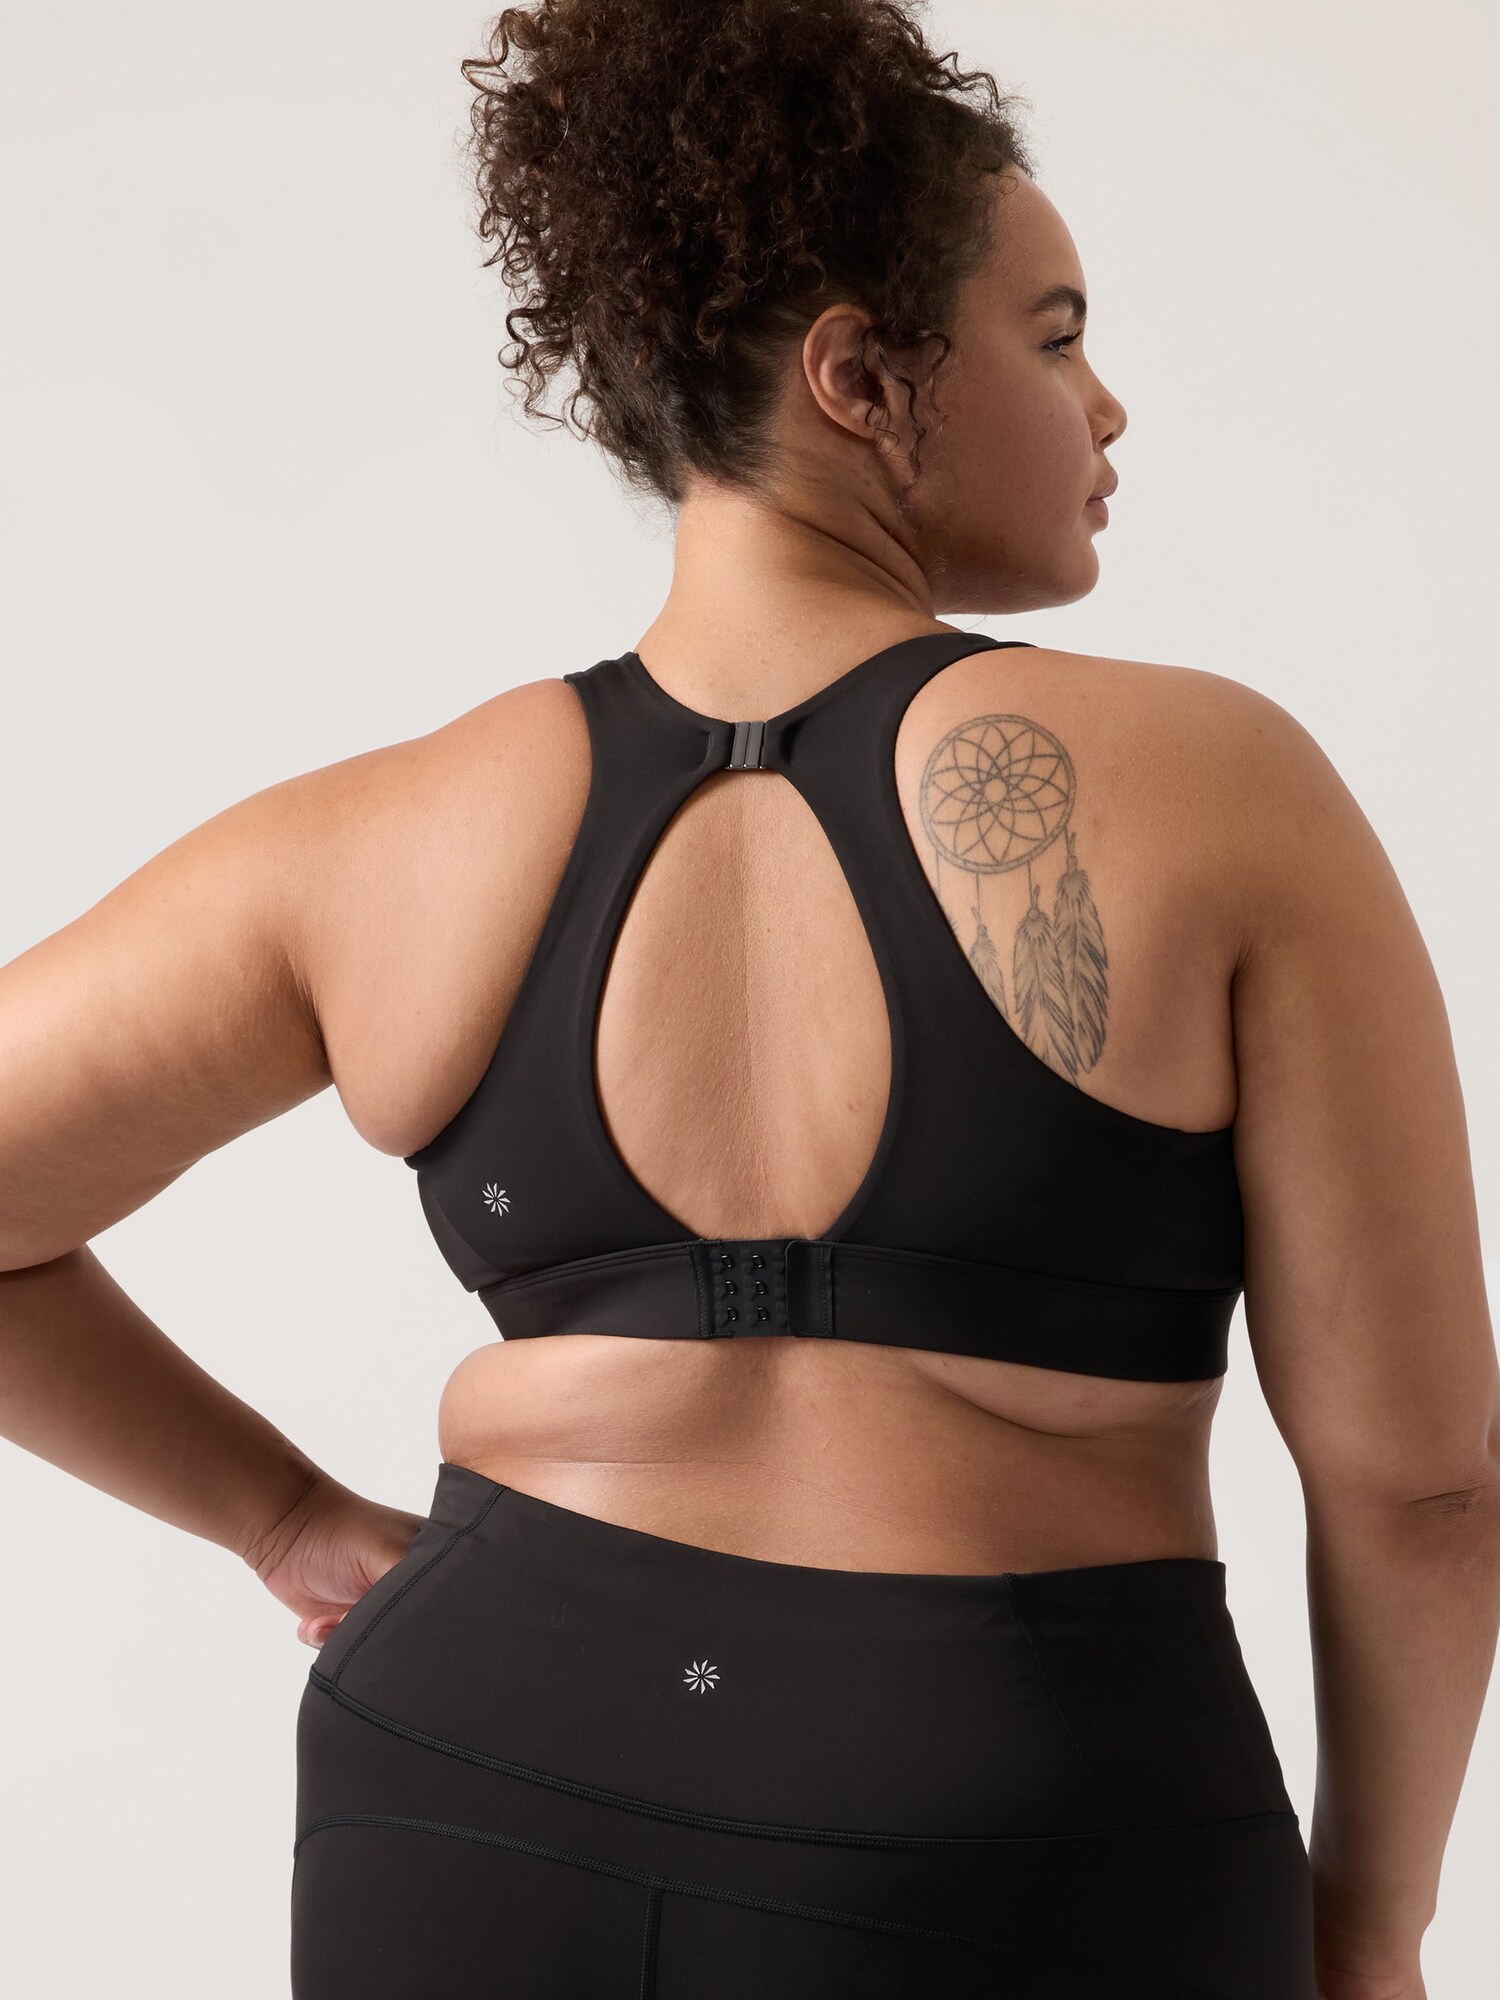 Athleta D-DD Sports Bras Try On! My Review of 3 Styles 